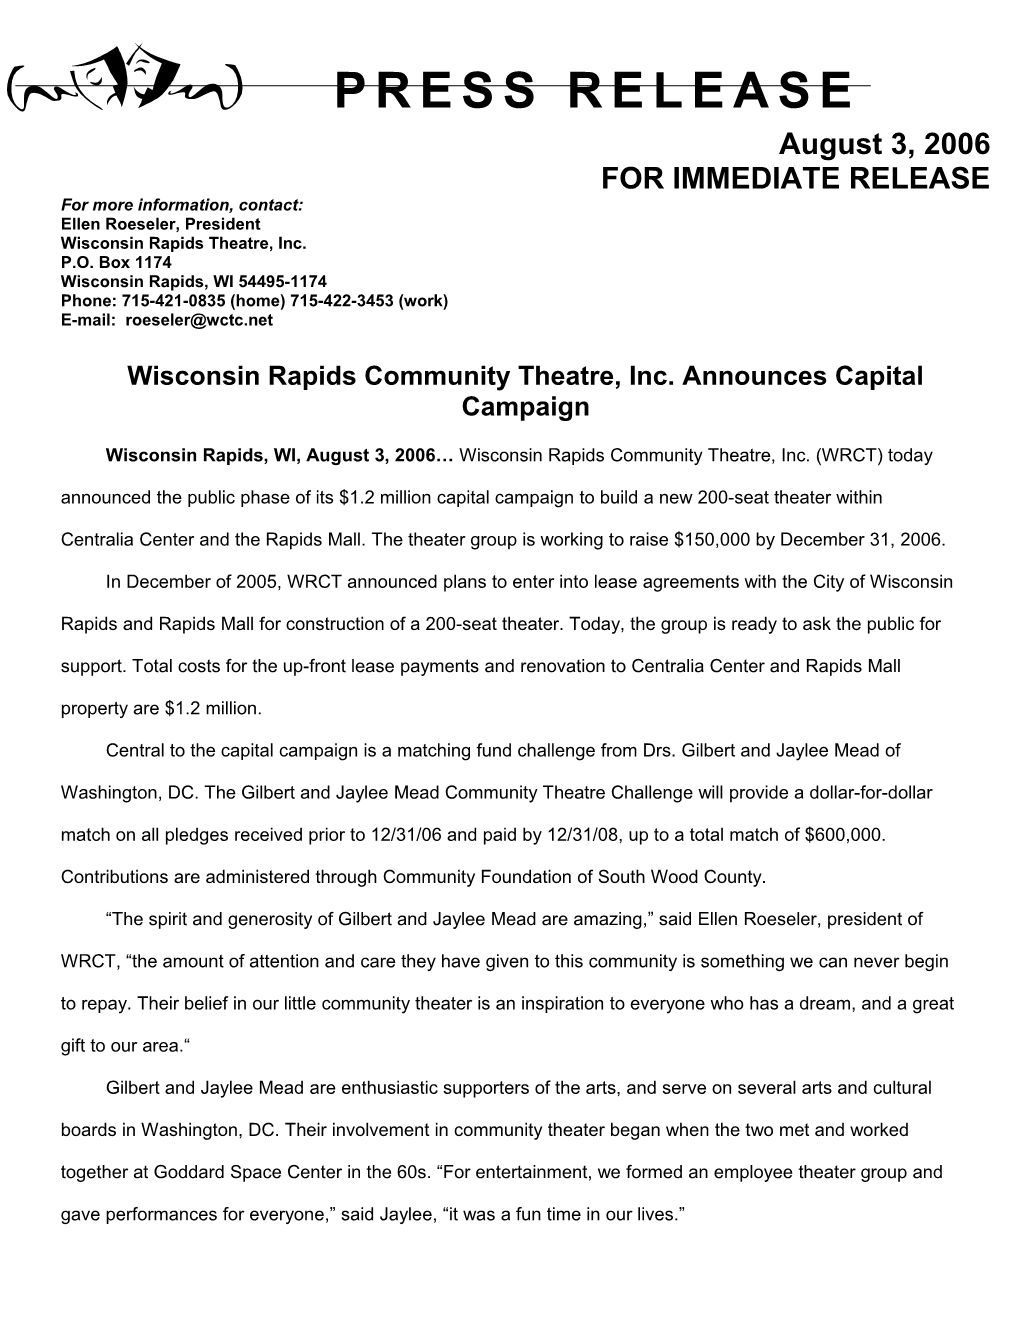 Wisconsin Rapids Community Theatre Announces Agreement with City to Build a New Theatre